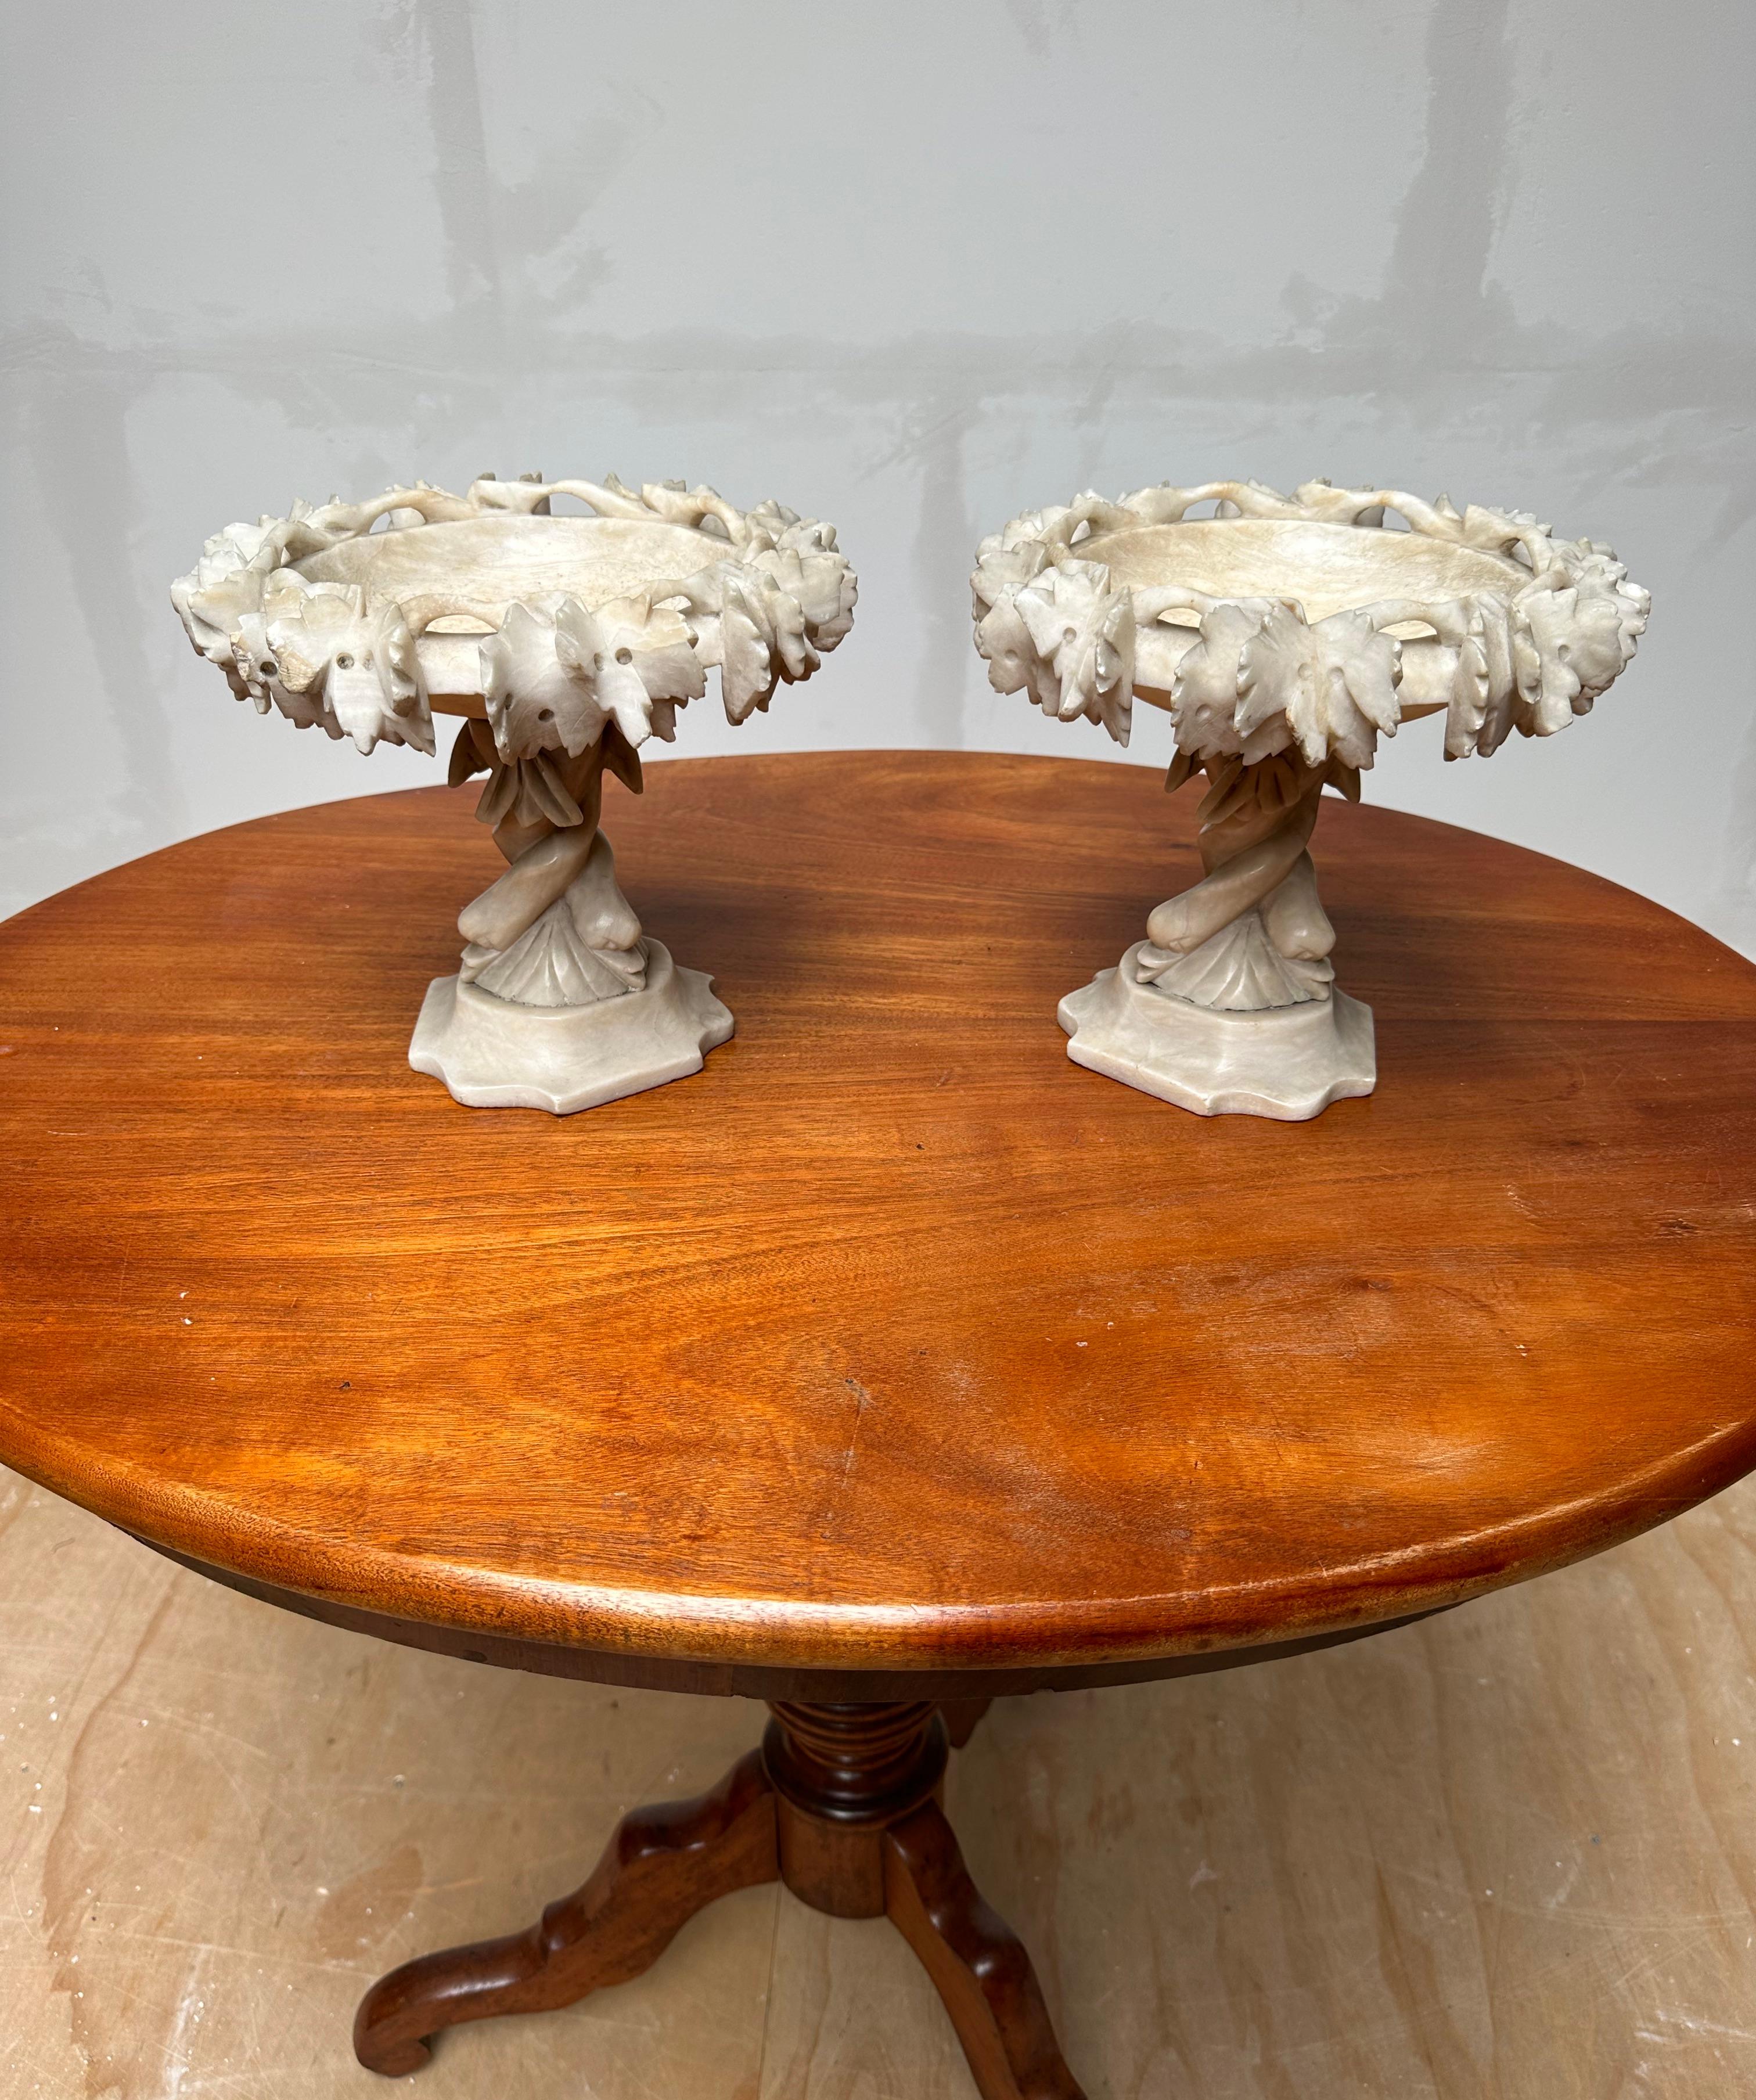 Antique & Rare Pair of Hand Carved Italian Alabaster Tazza Table Display Pieces For Sale 10